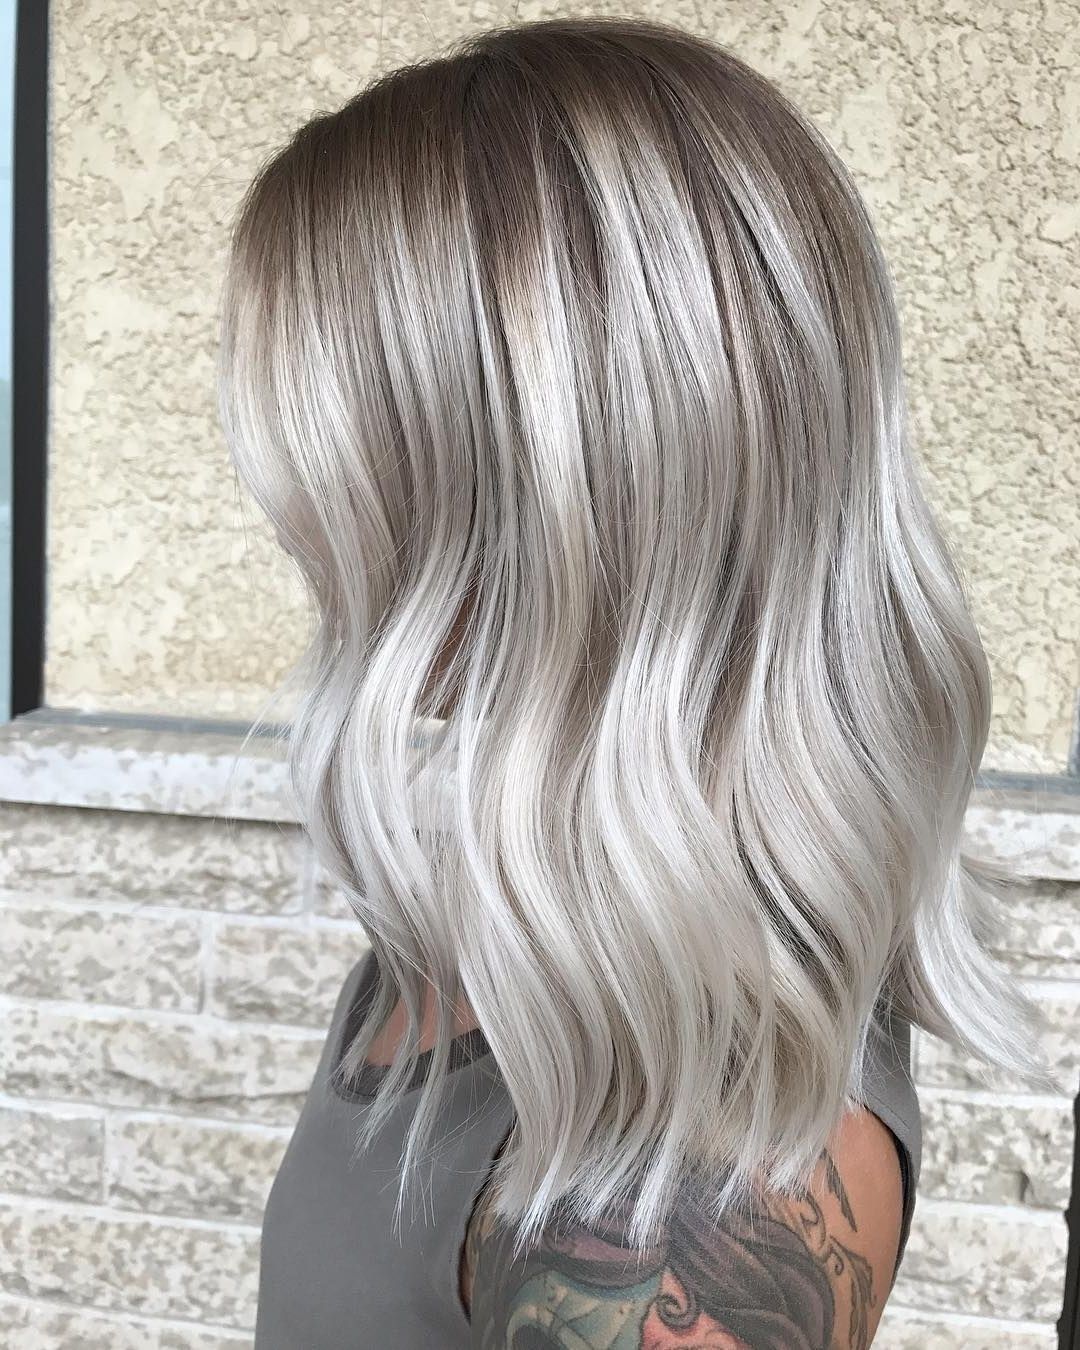 Most Up To Date All Over Cool Blonde Hairstyles Inside 10 Ash Blonde Hairstyles For All Skin Tones, 2018 Best Hair Color Trends (View 9 of 20)